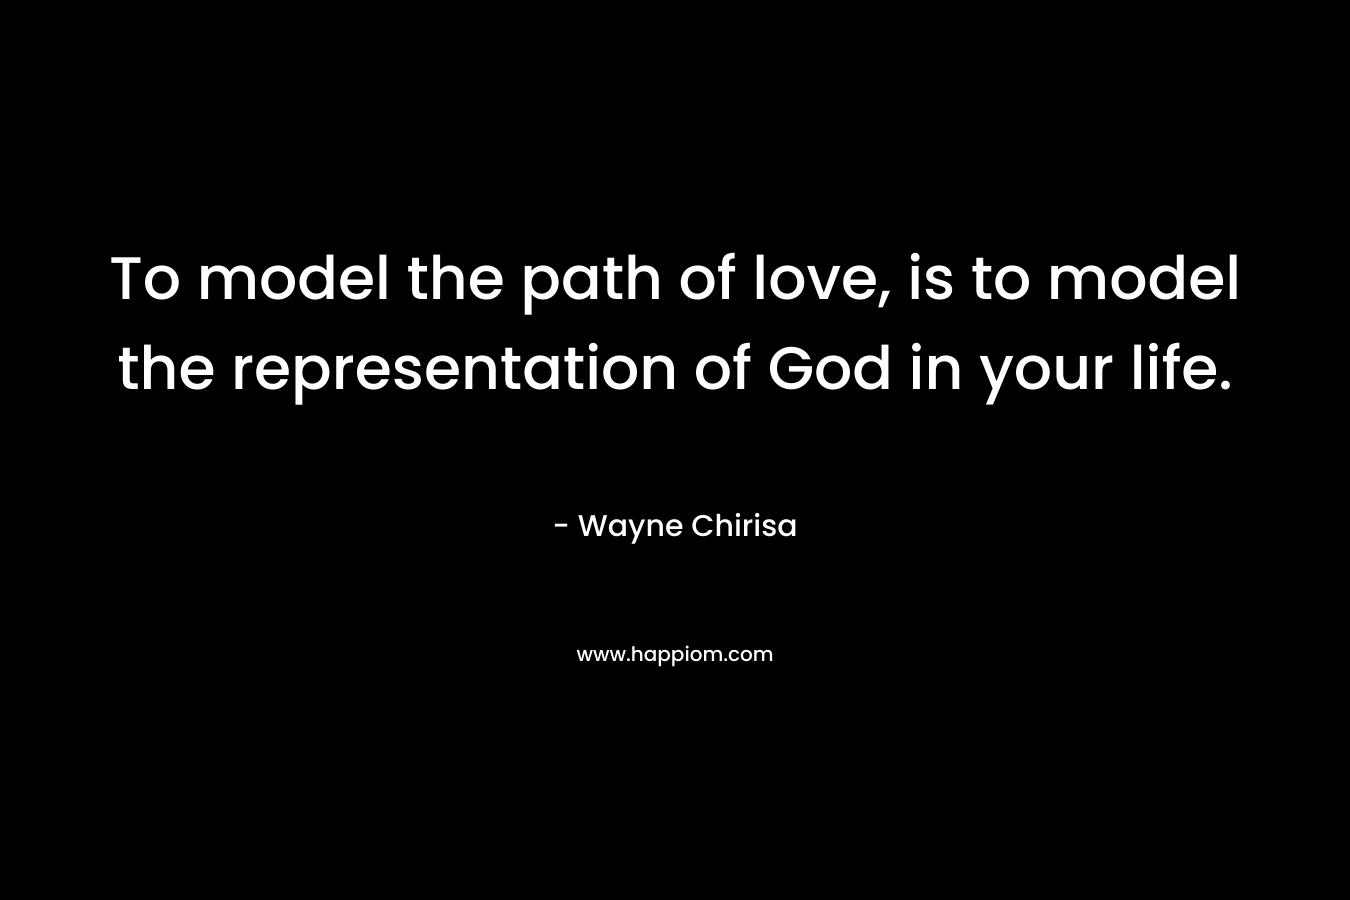 To model the path of love, is to model the representation of God in your life.